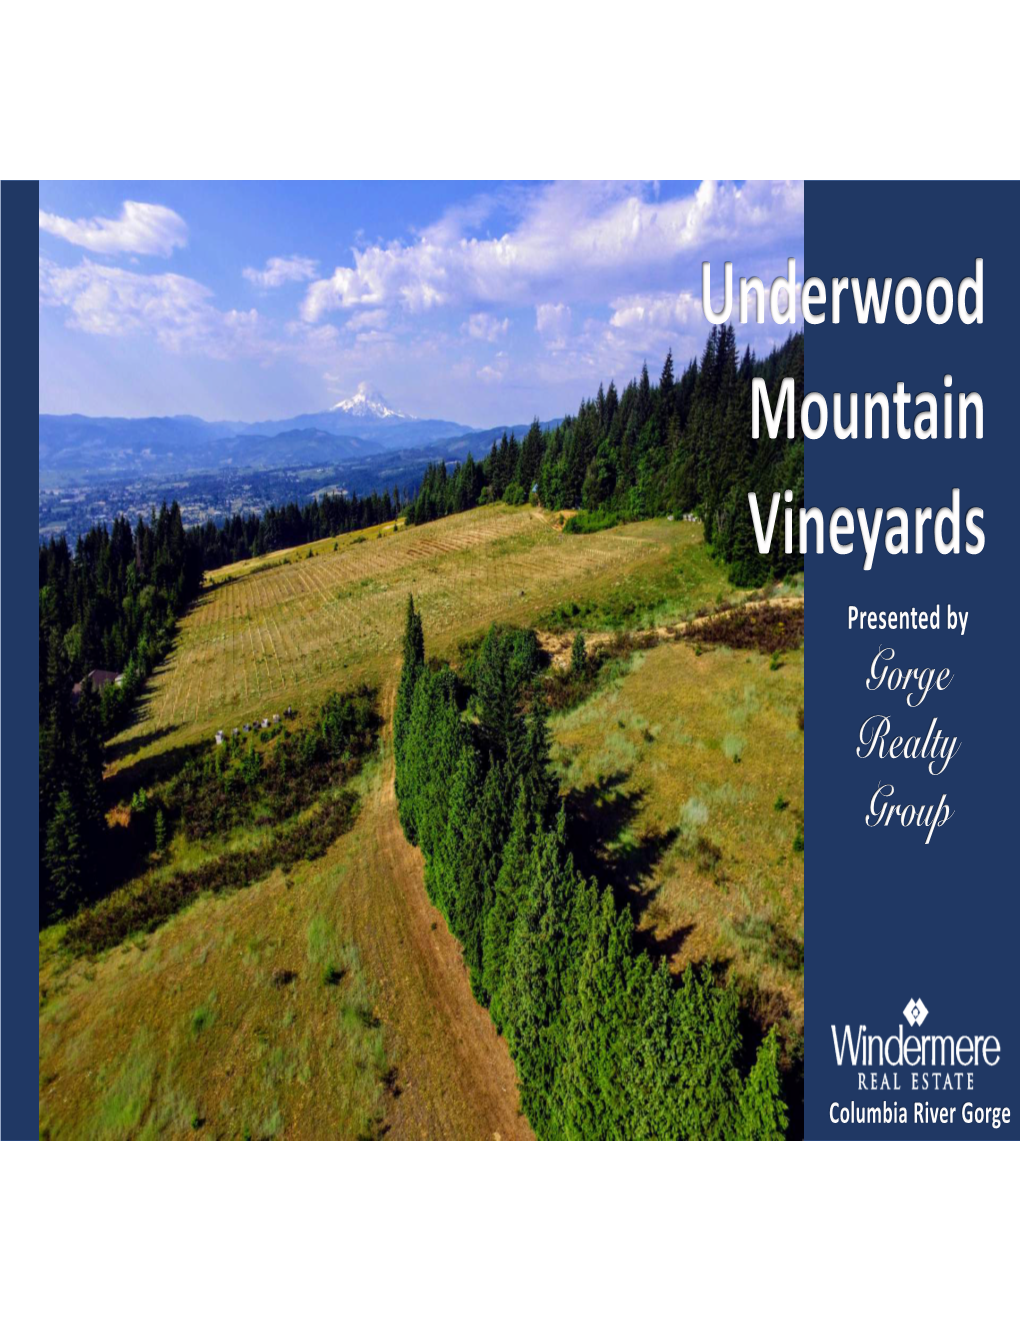 Underwood Mountain Vineyards Presented by Gorge Realty Group